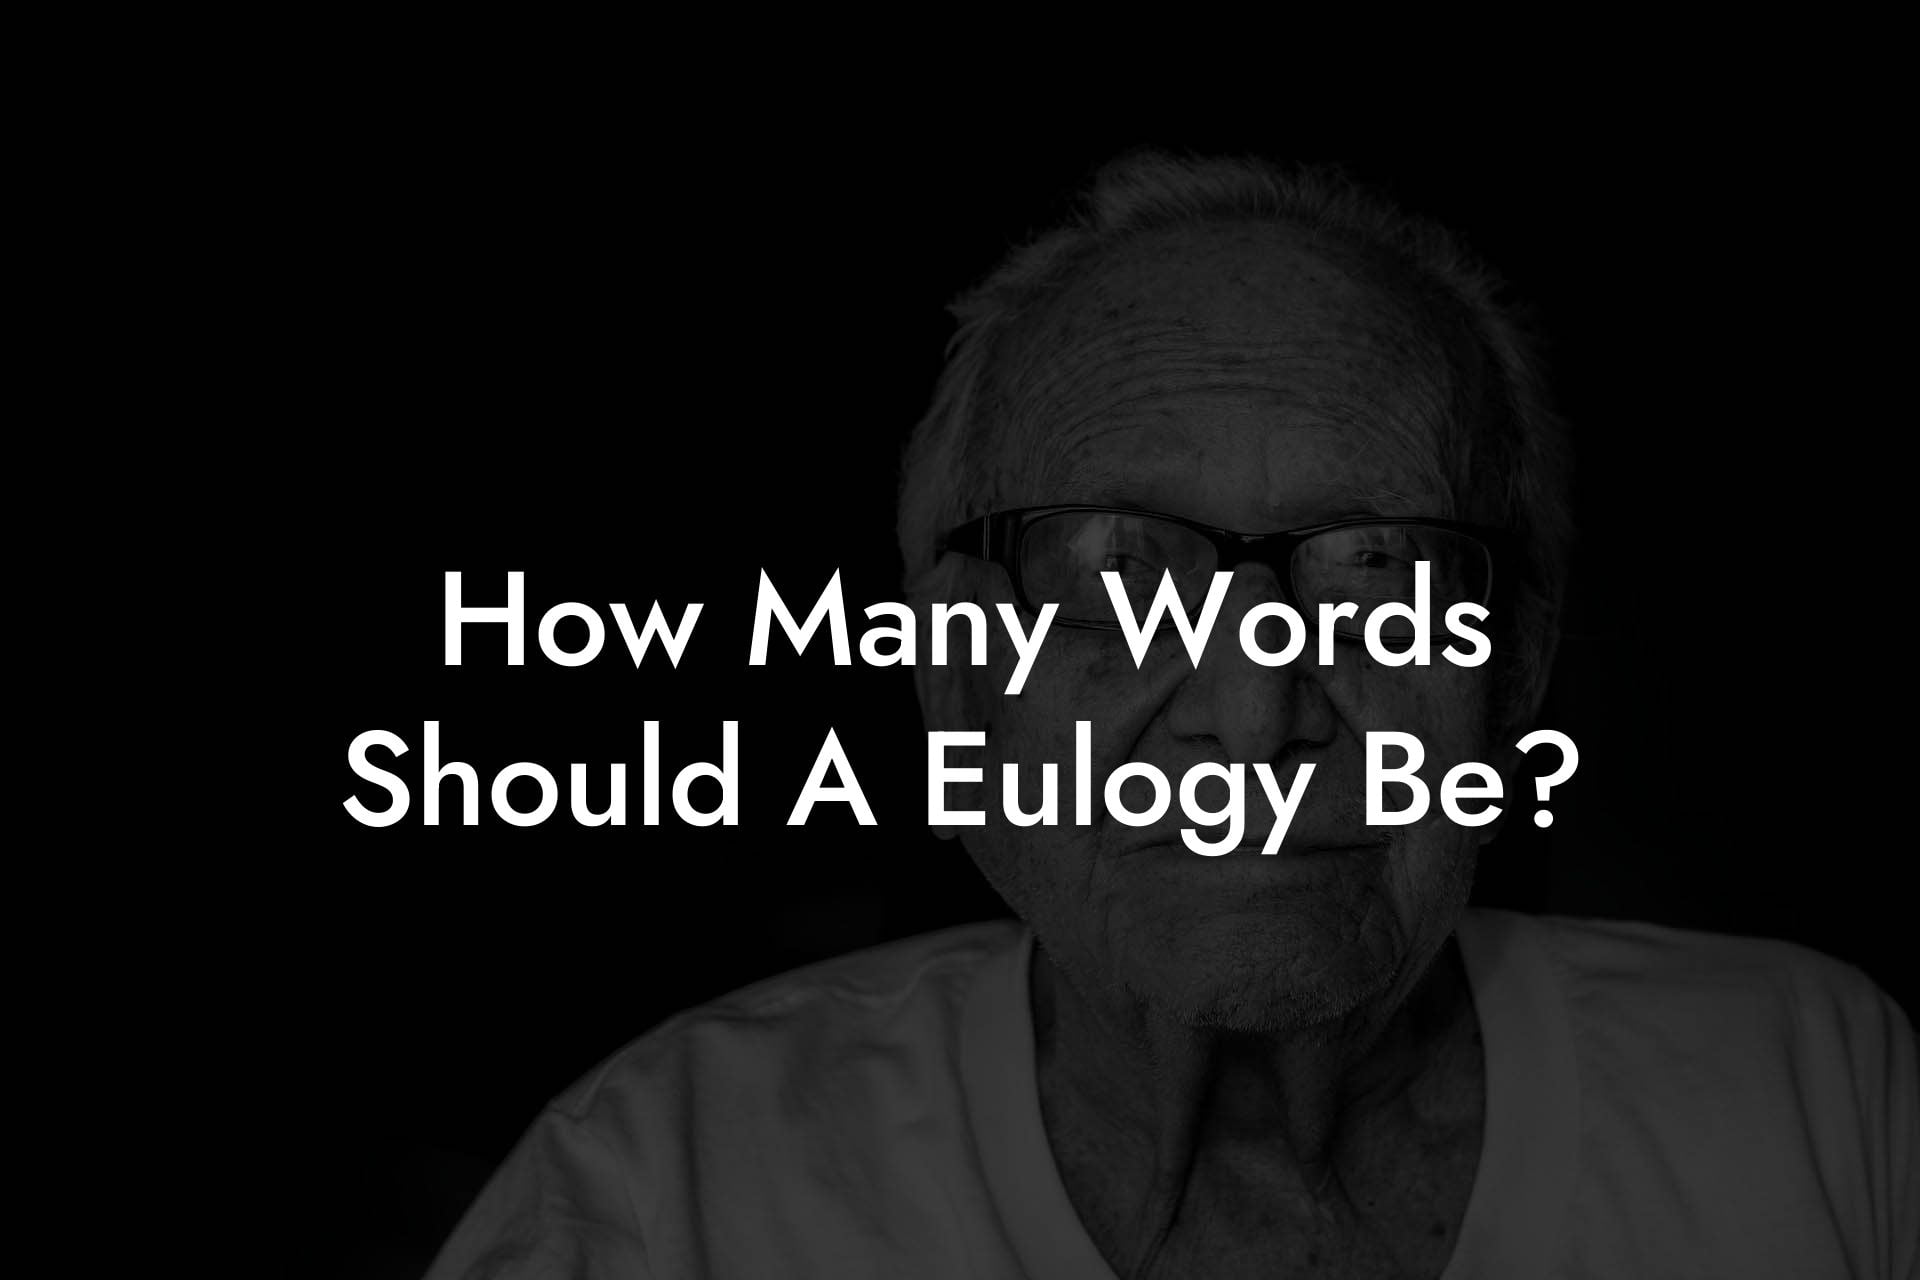 How Many Words Should A Eulogy Be?